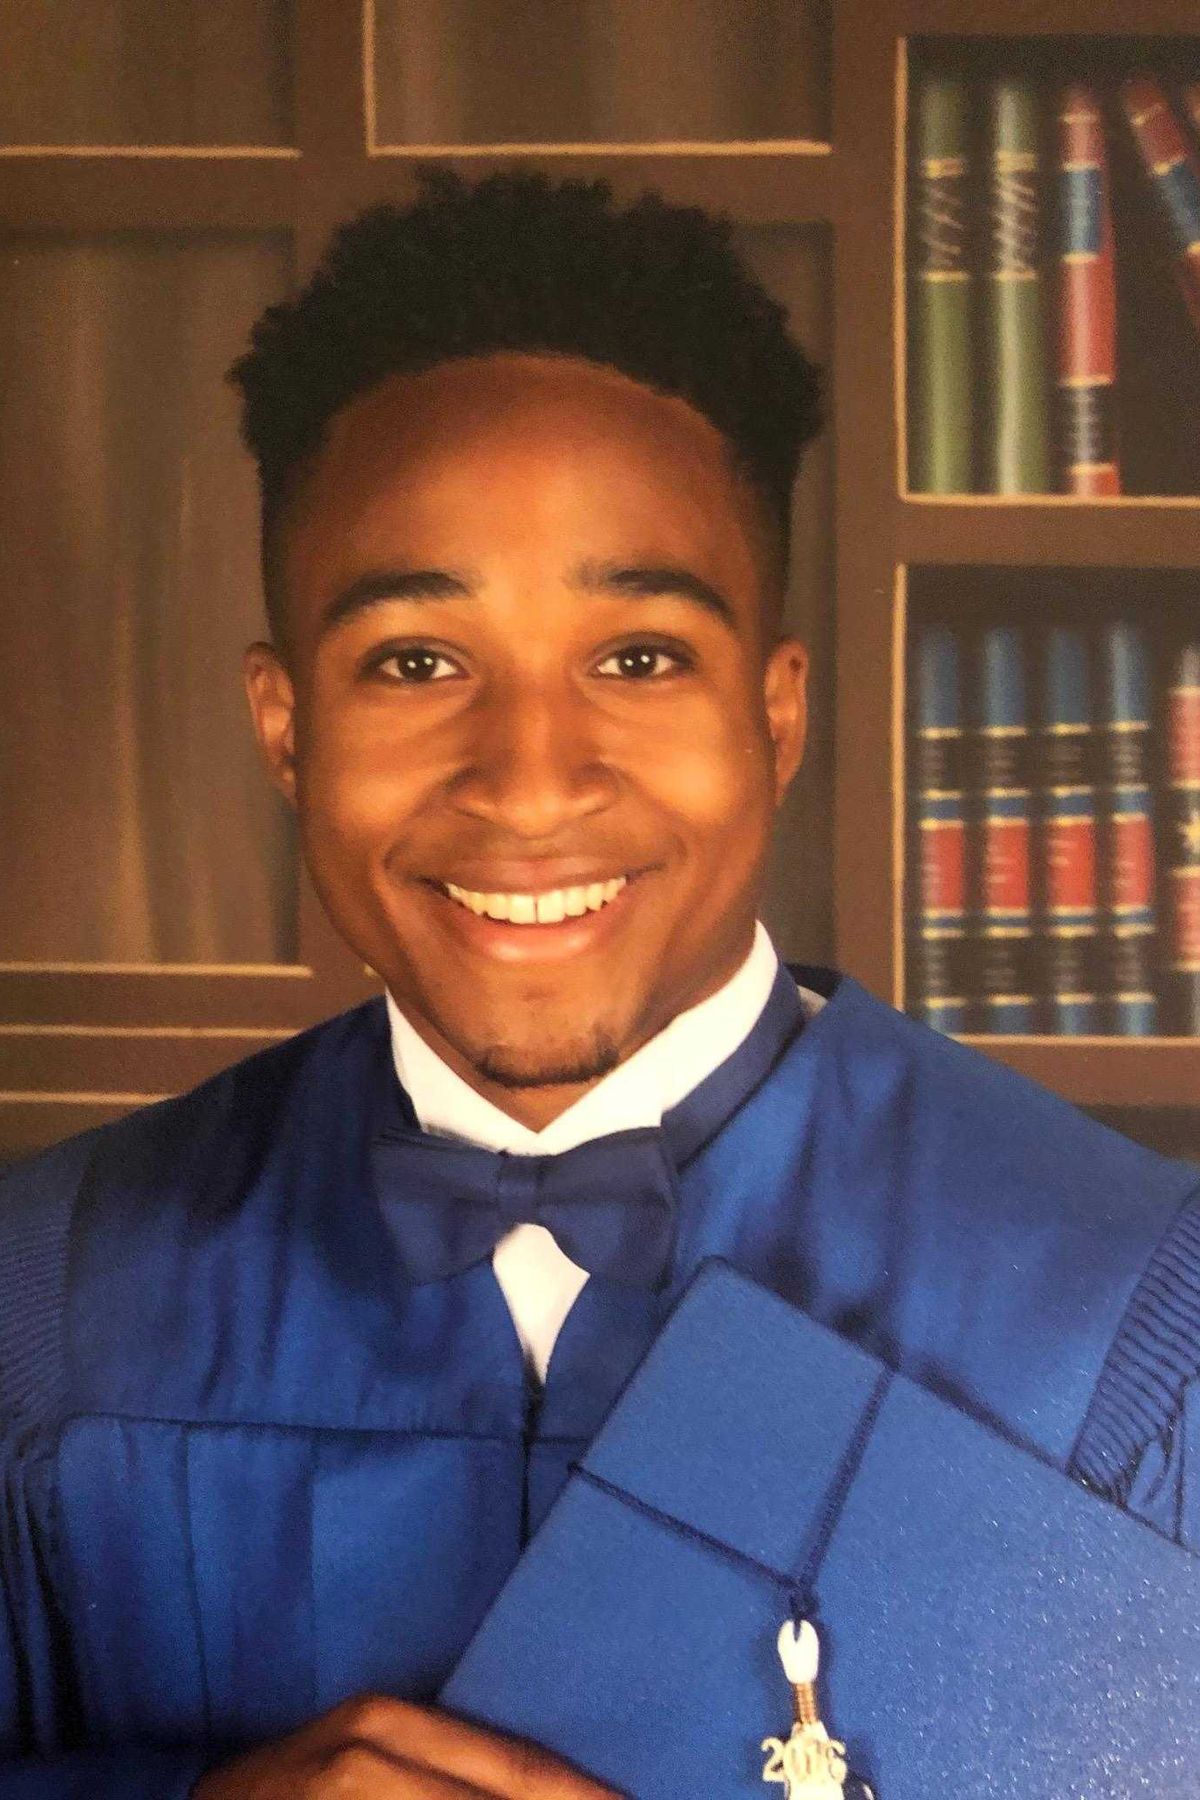 DaeQuan Morrison graduated from Archbishop Molloy High School in Briarwood in 2016.